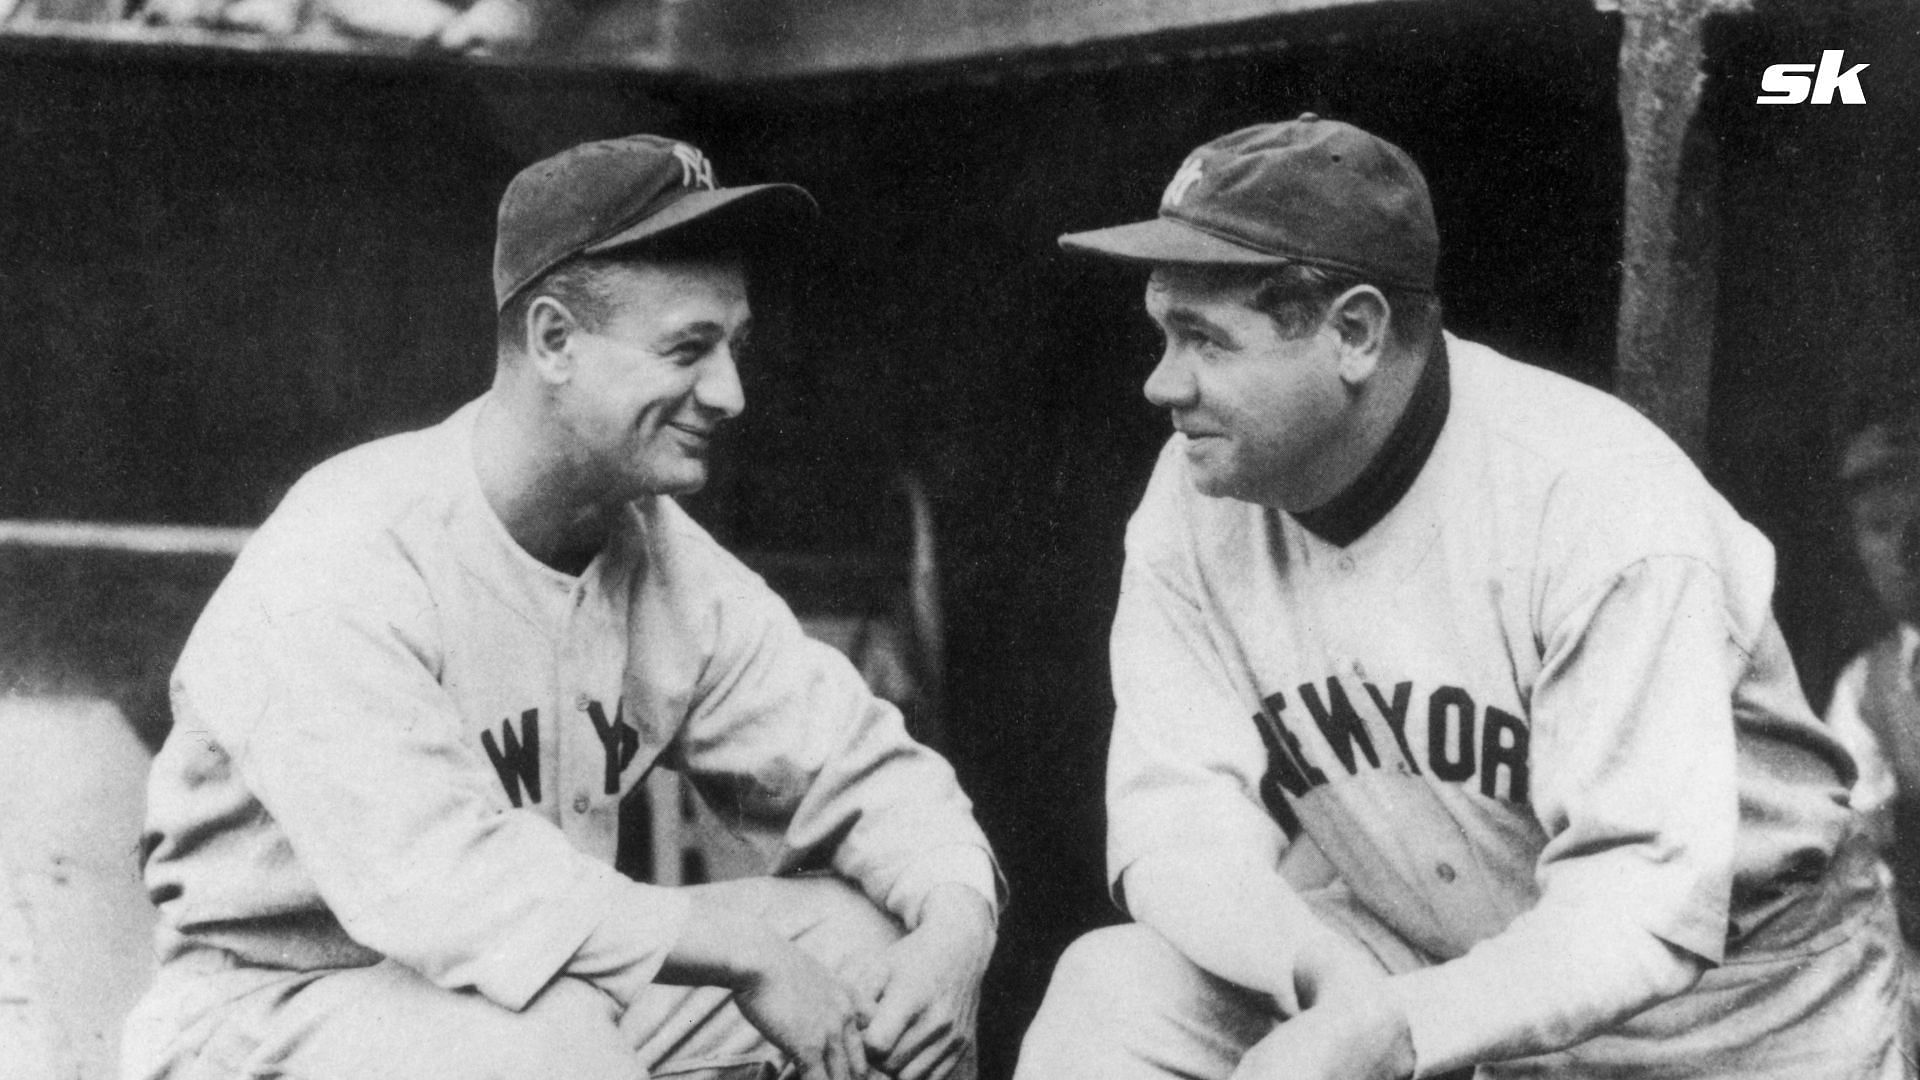 When late Yankees legend Babe Ruth clapped back at Lou Gehrig's